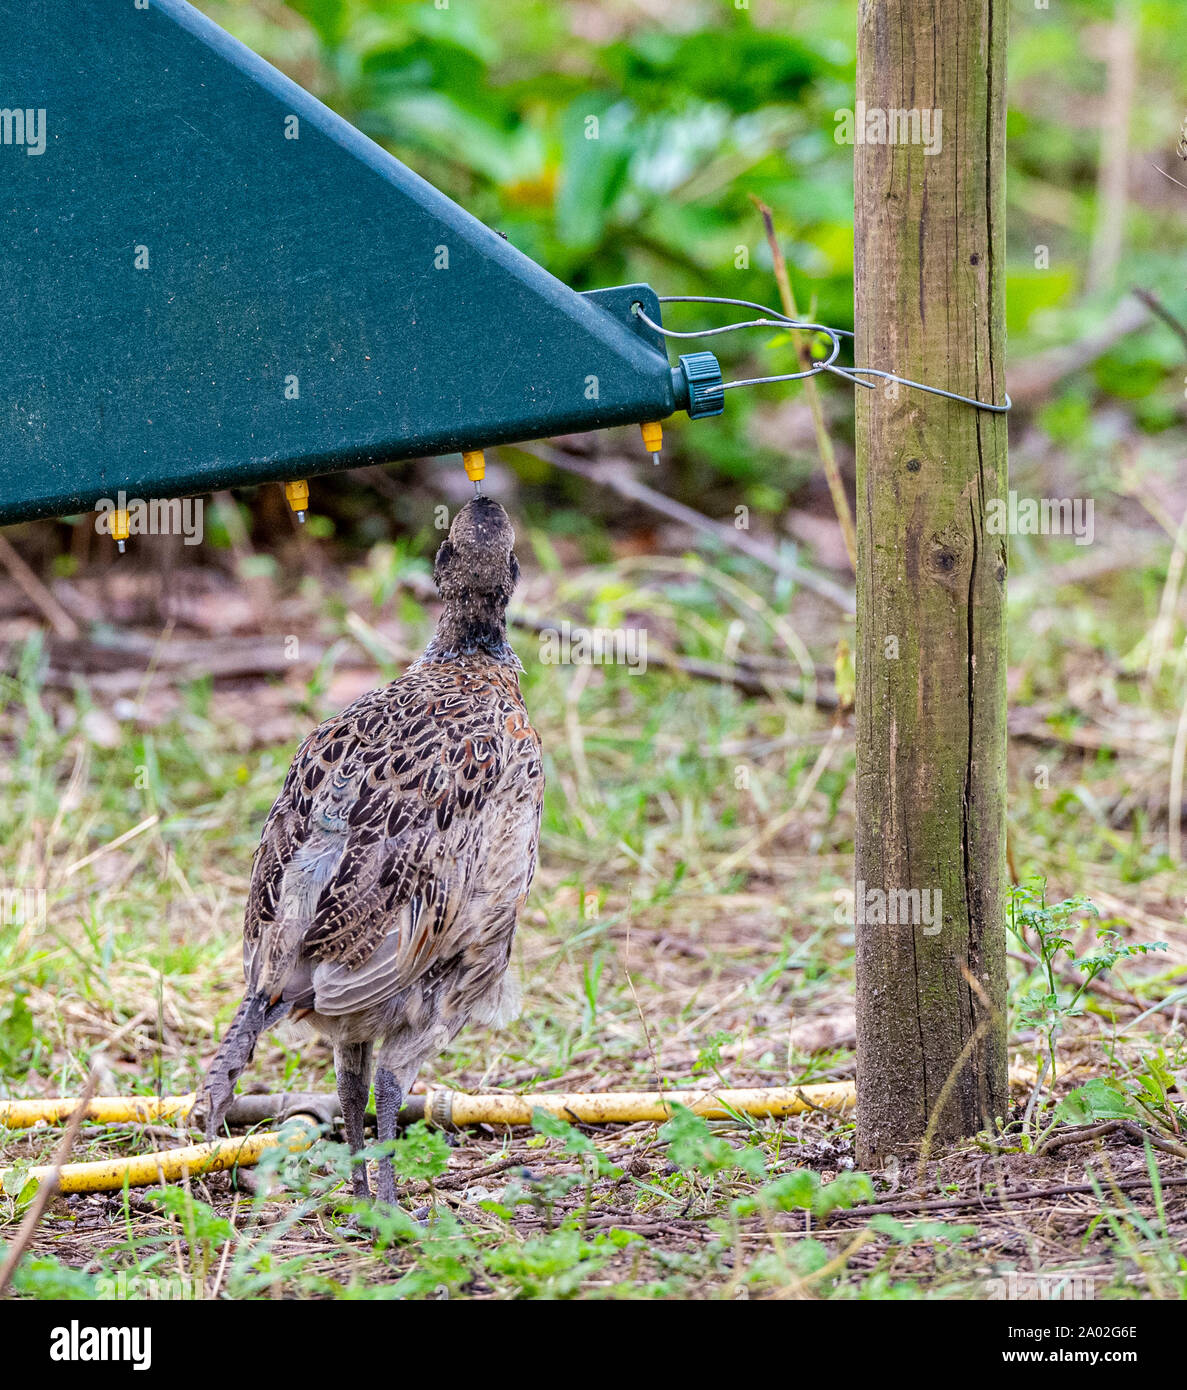 Ten week old pheasant chick, (Phasianus colchicus) often known as a poult, drinking on a drinking system, after being released into a gamekeepers release pen on an English estate Stock Photo